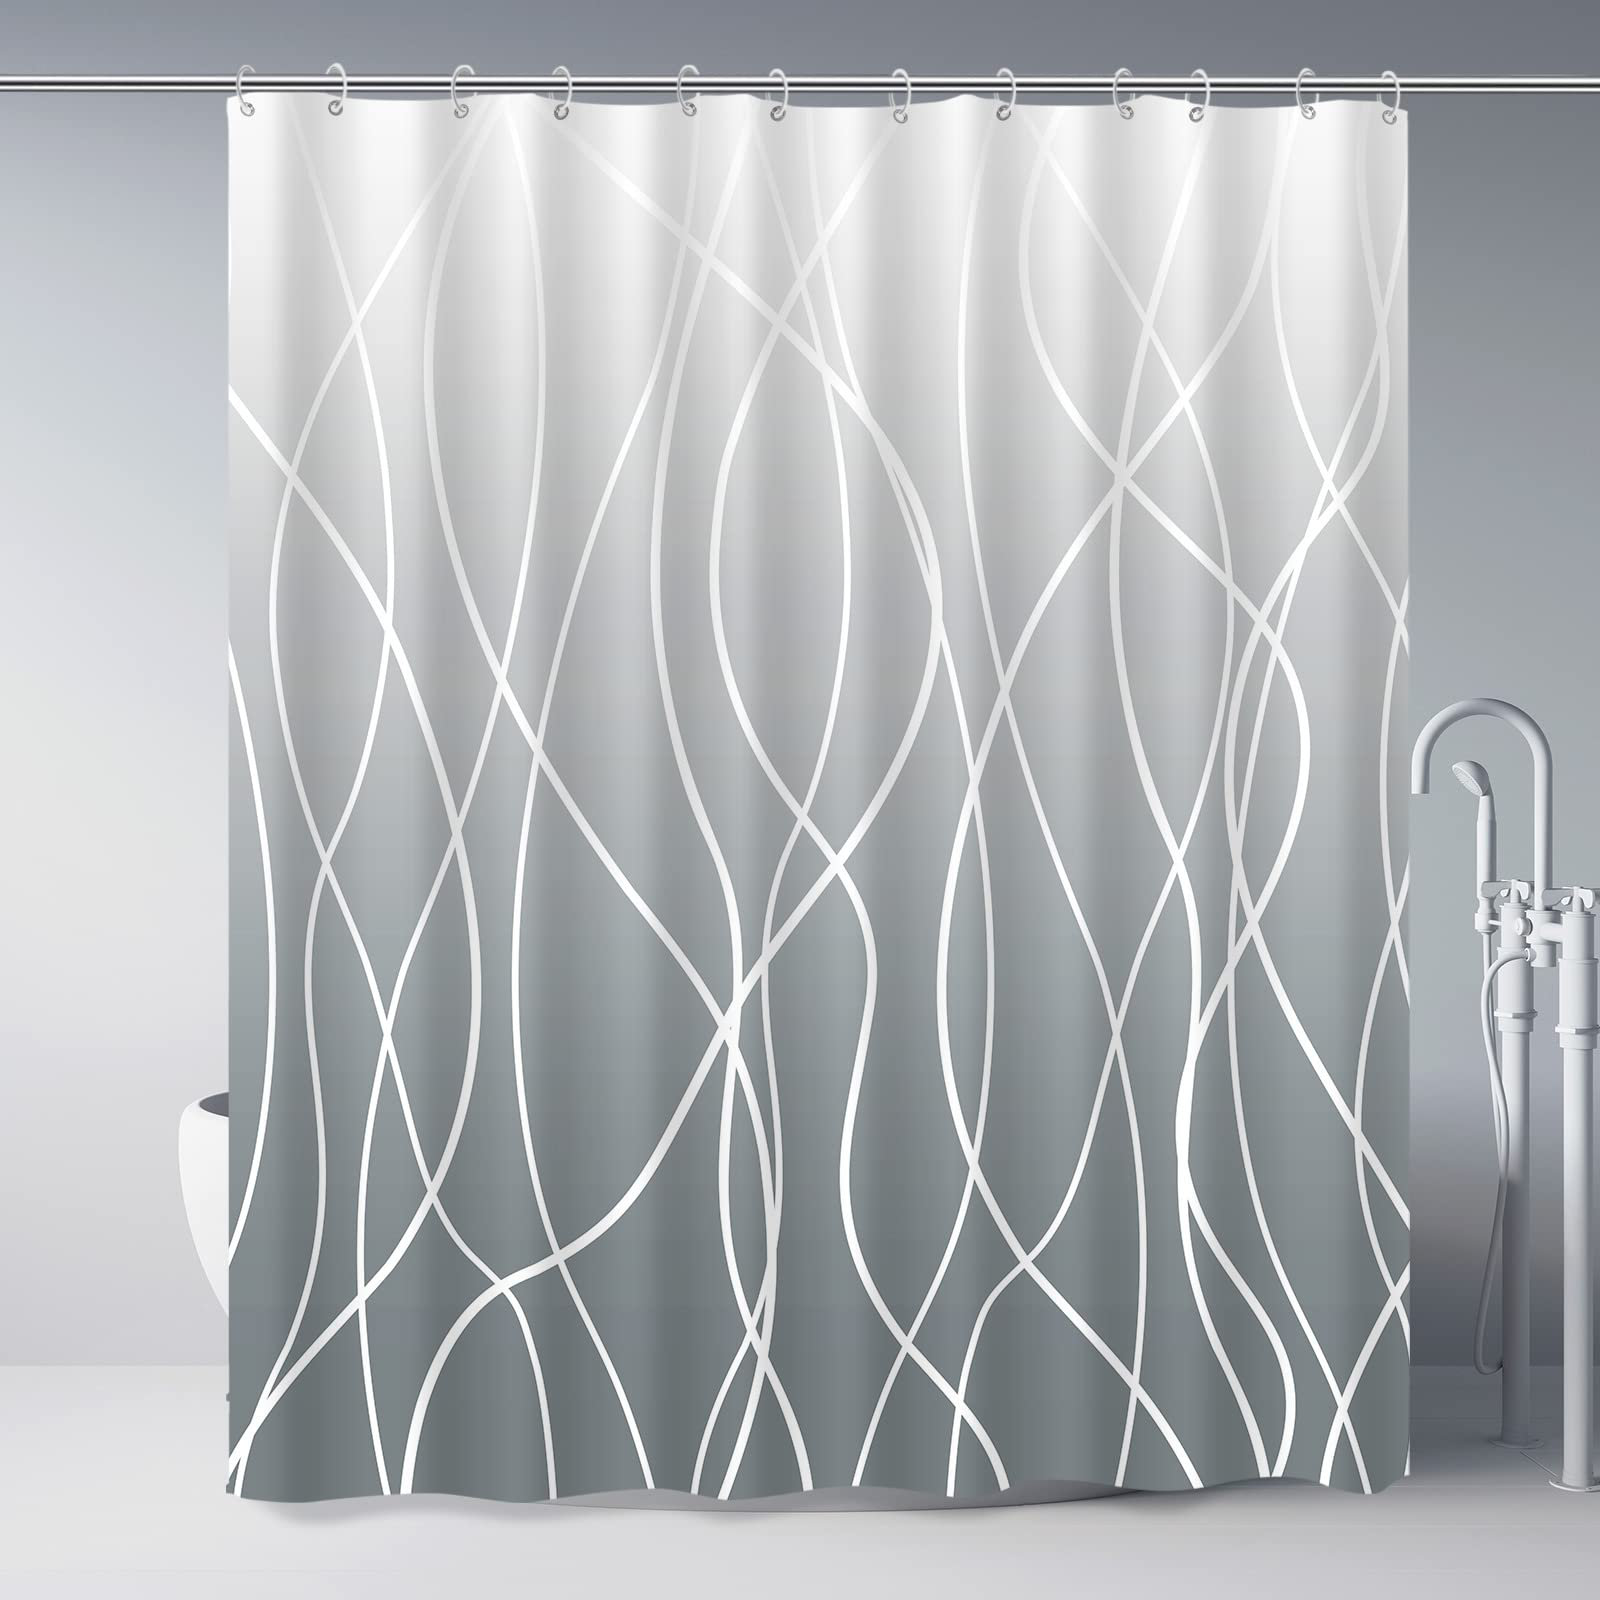 Ivy Bronx Keevi Ombre Shower Curtain with Hooks Included